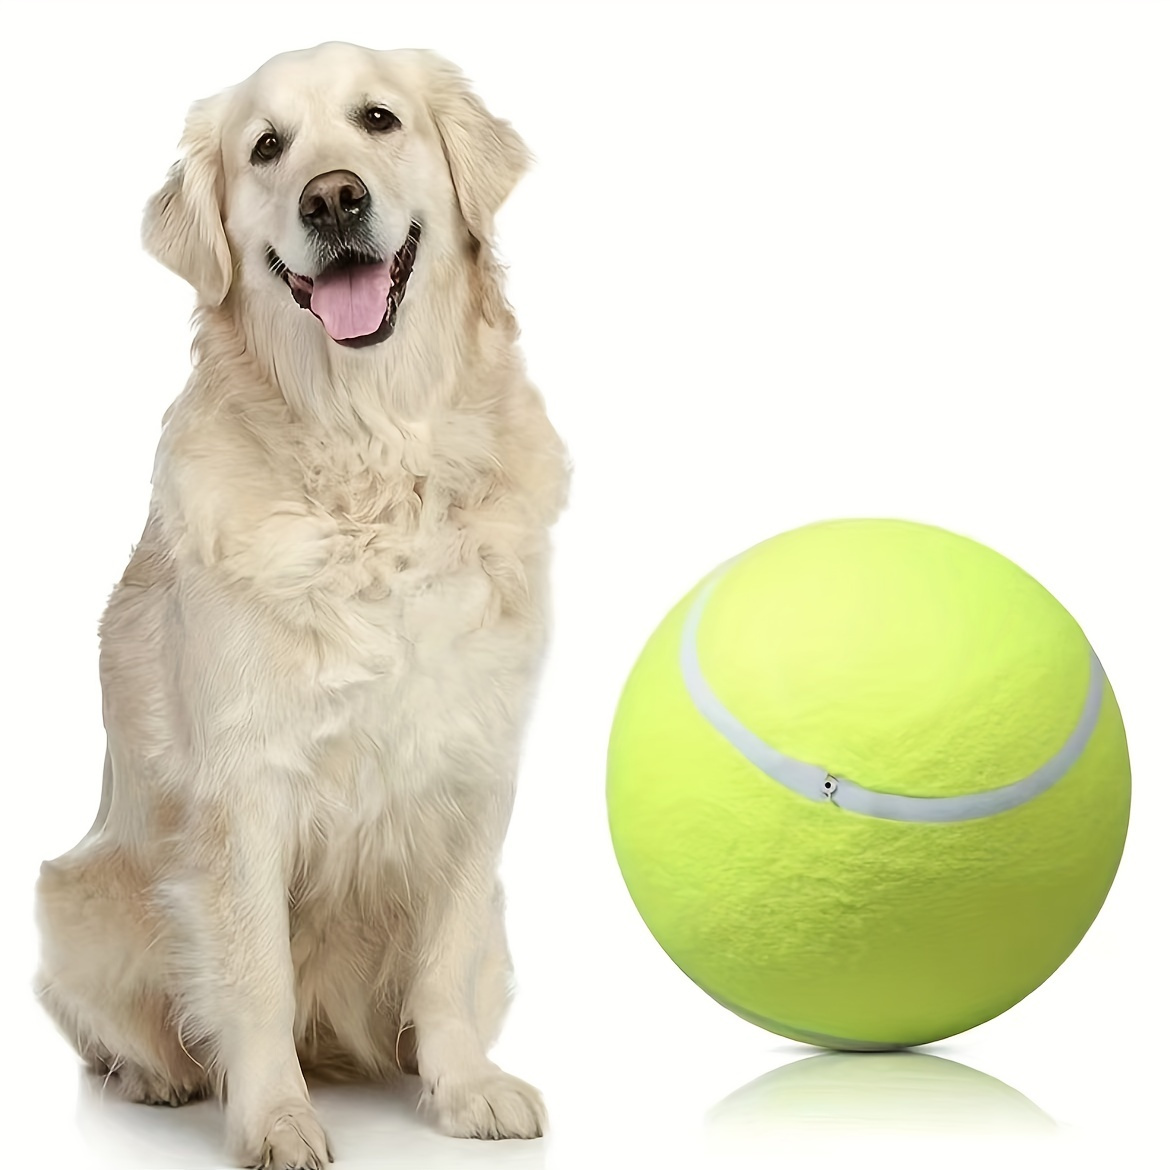 

1pc 24cm/9.5in Large Size Inflatable Tennis Dog Chew Toy, Interactive Toy For Medium Large Dog Interactive Training Supplies